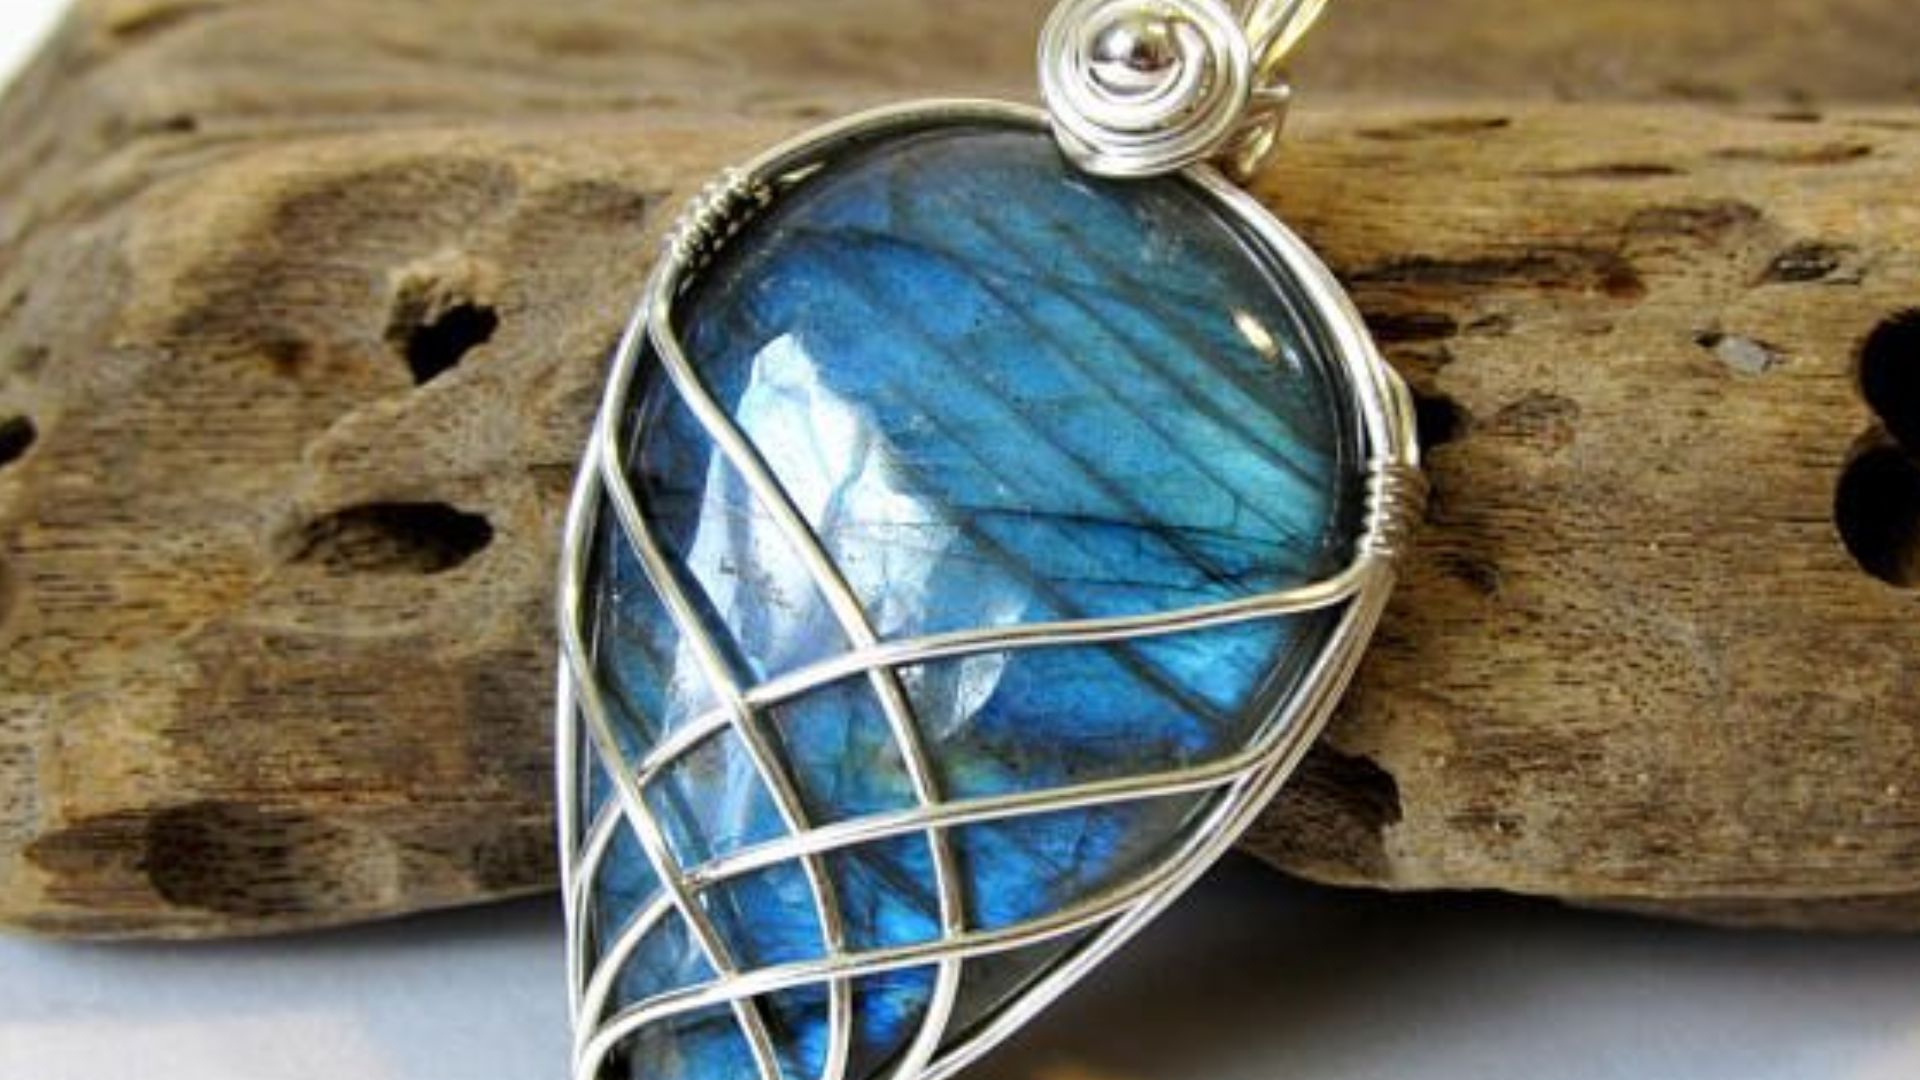 Wire-wrapped Silver Jewelry - Creating Unique Designs